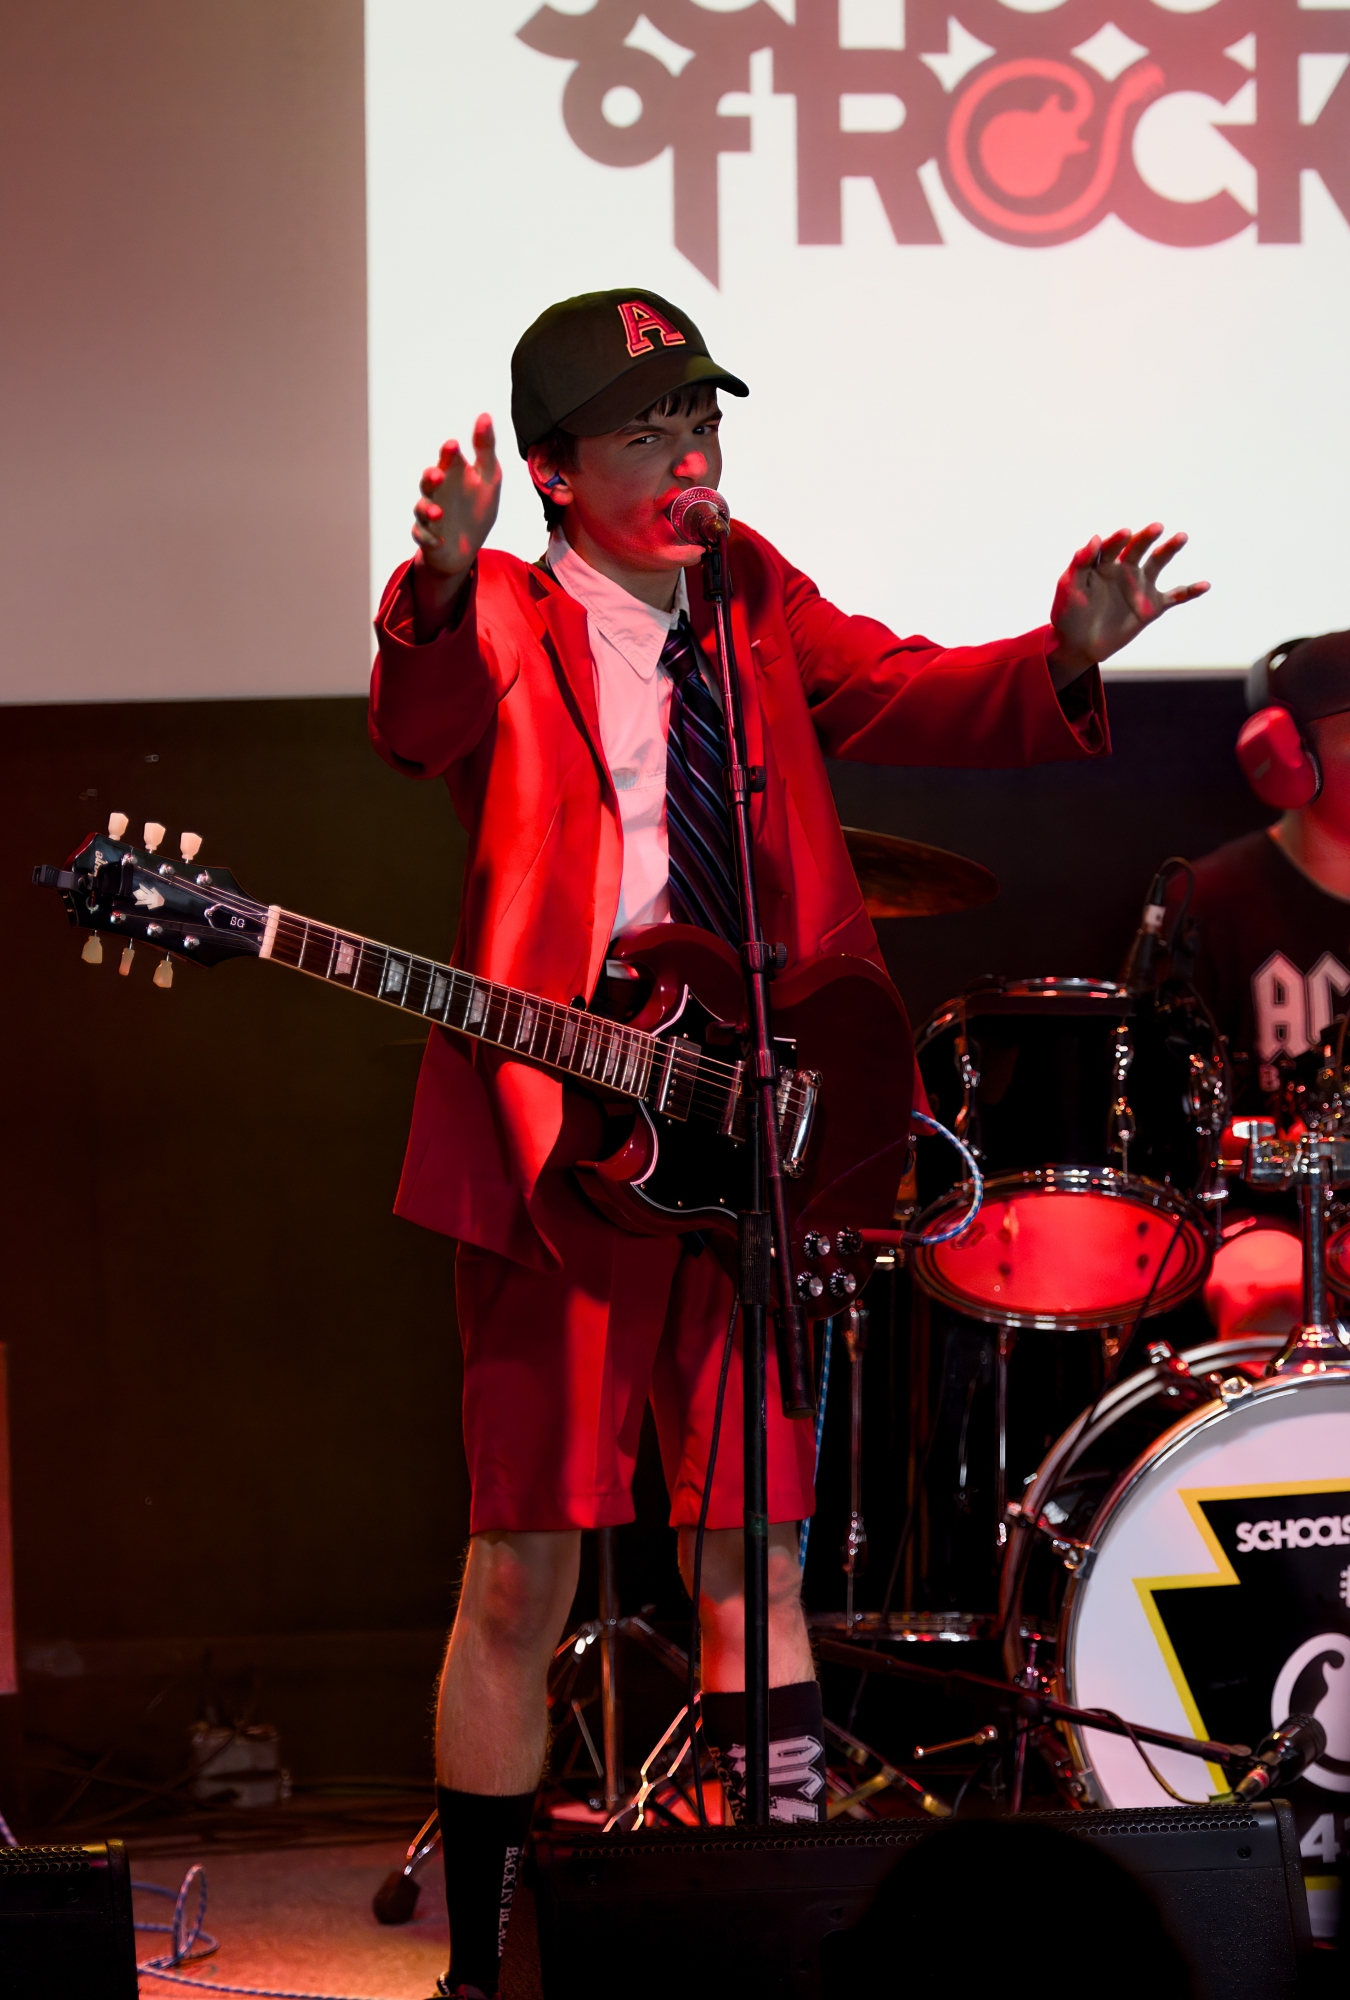 One of our students went all out and came as Angus Young to his Tribute to AC/DC Performance Showcase!